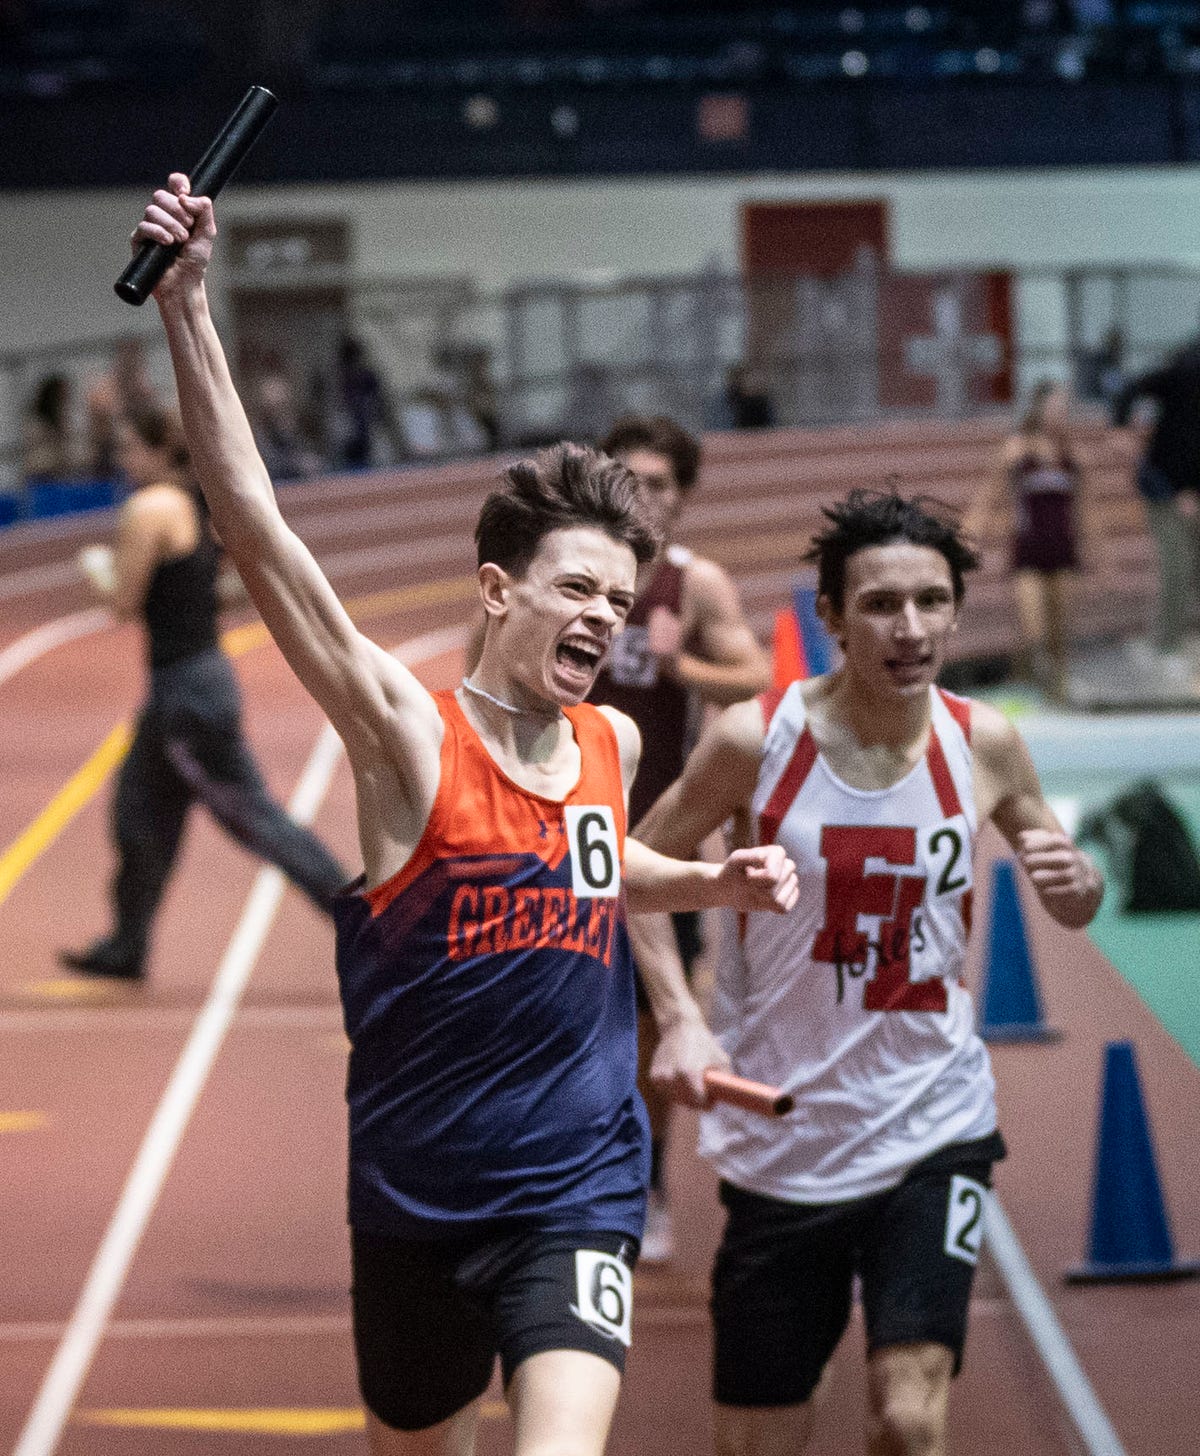 Horace Greeley and Suffern Dominate Class A Championships with Surprising Wins and Personal Best Performances